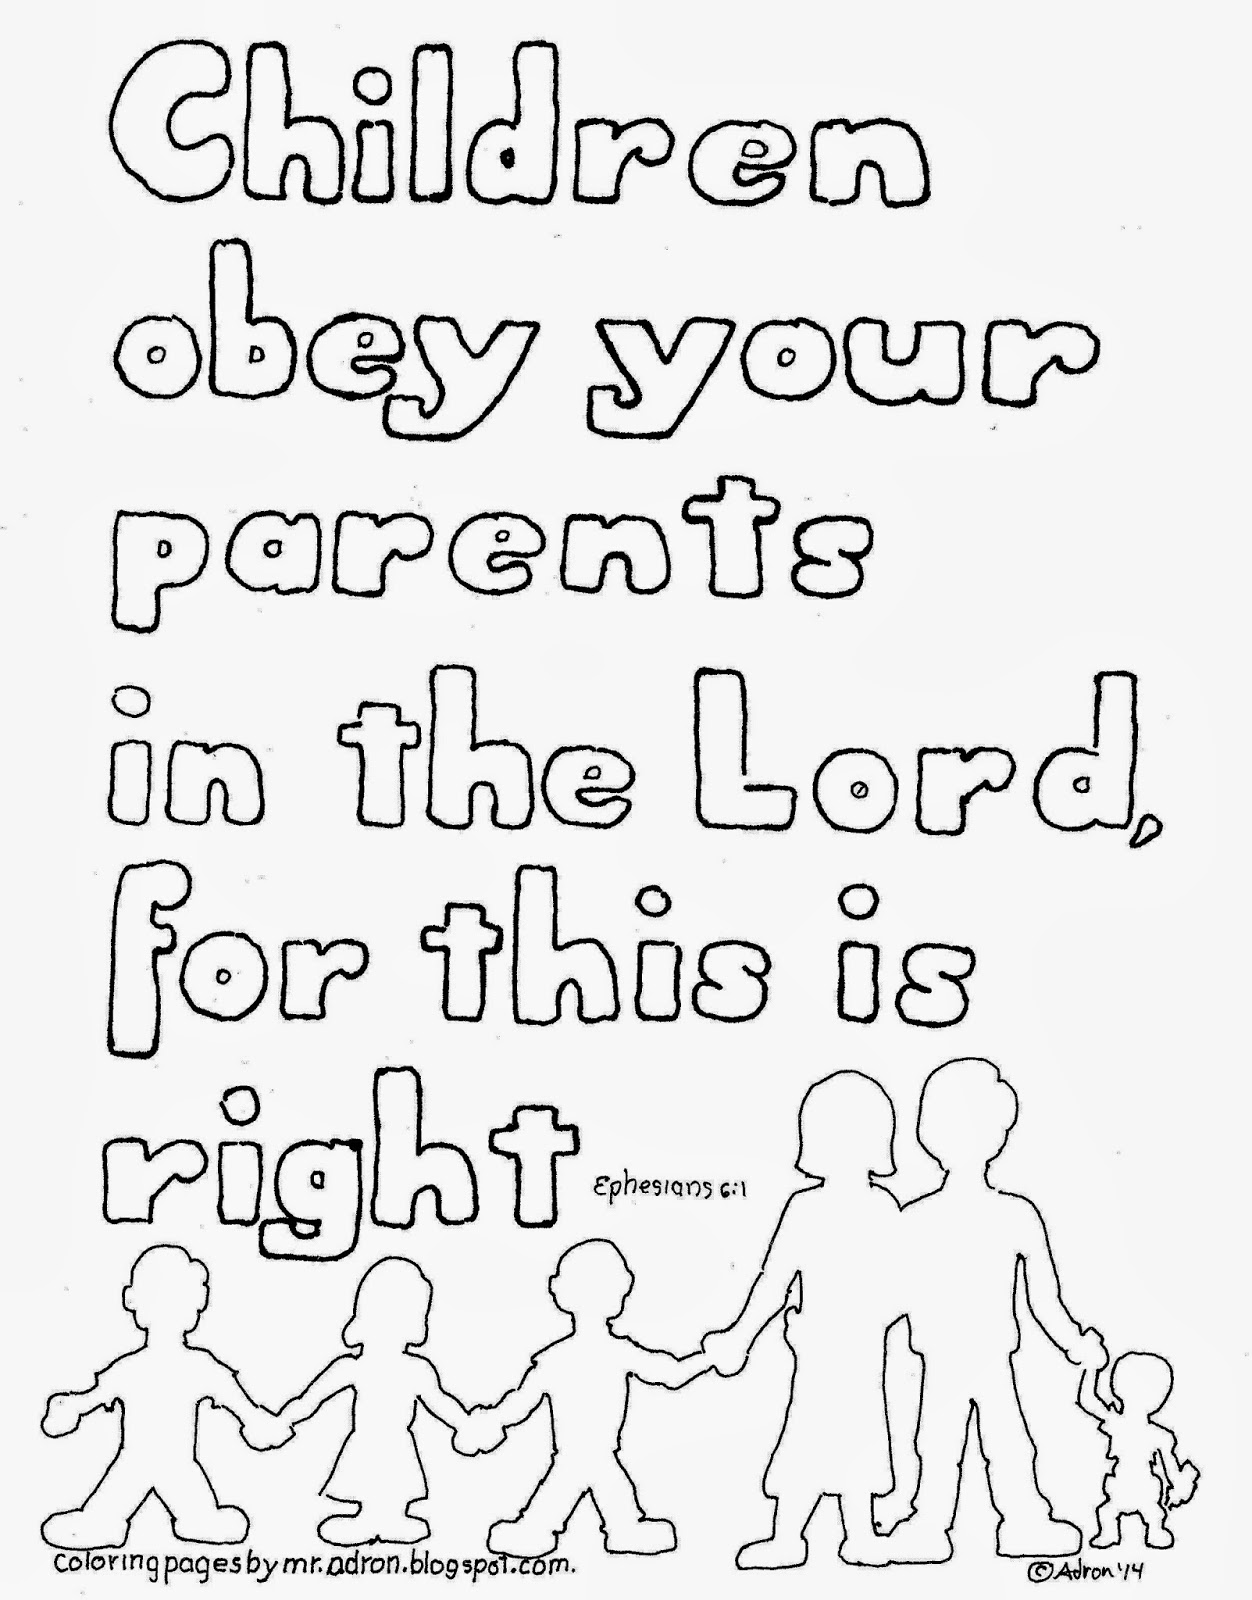 obeying rules coloring pages - photo #6